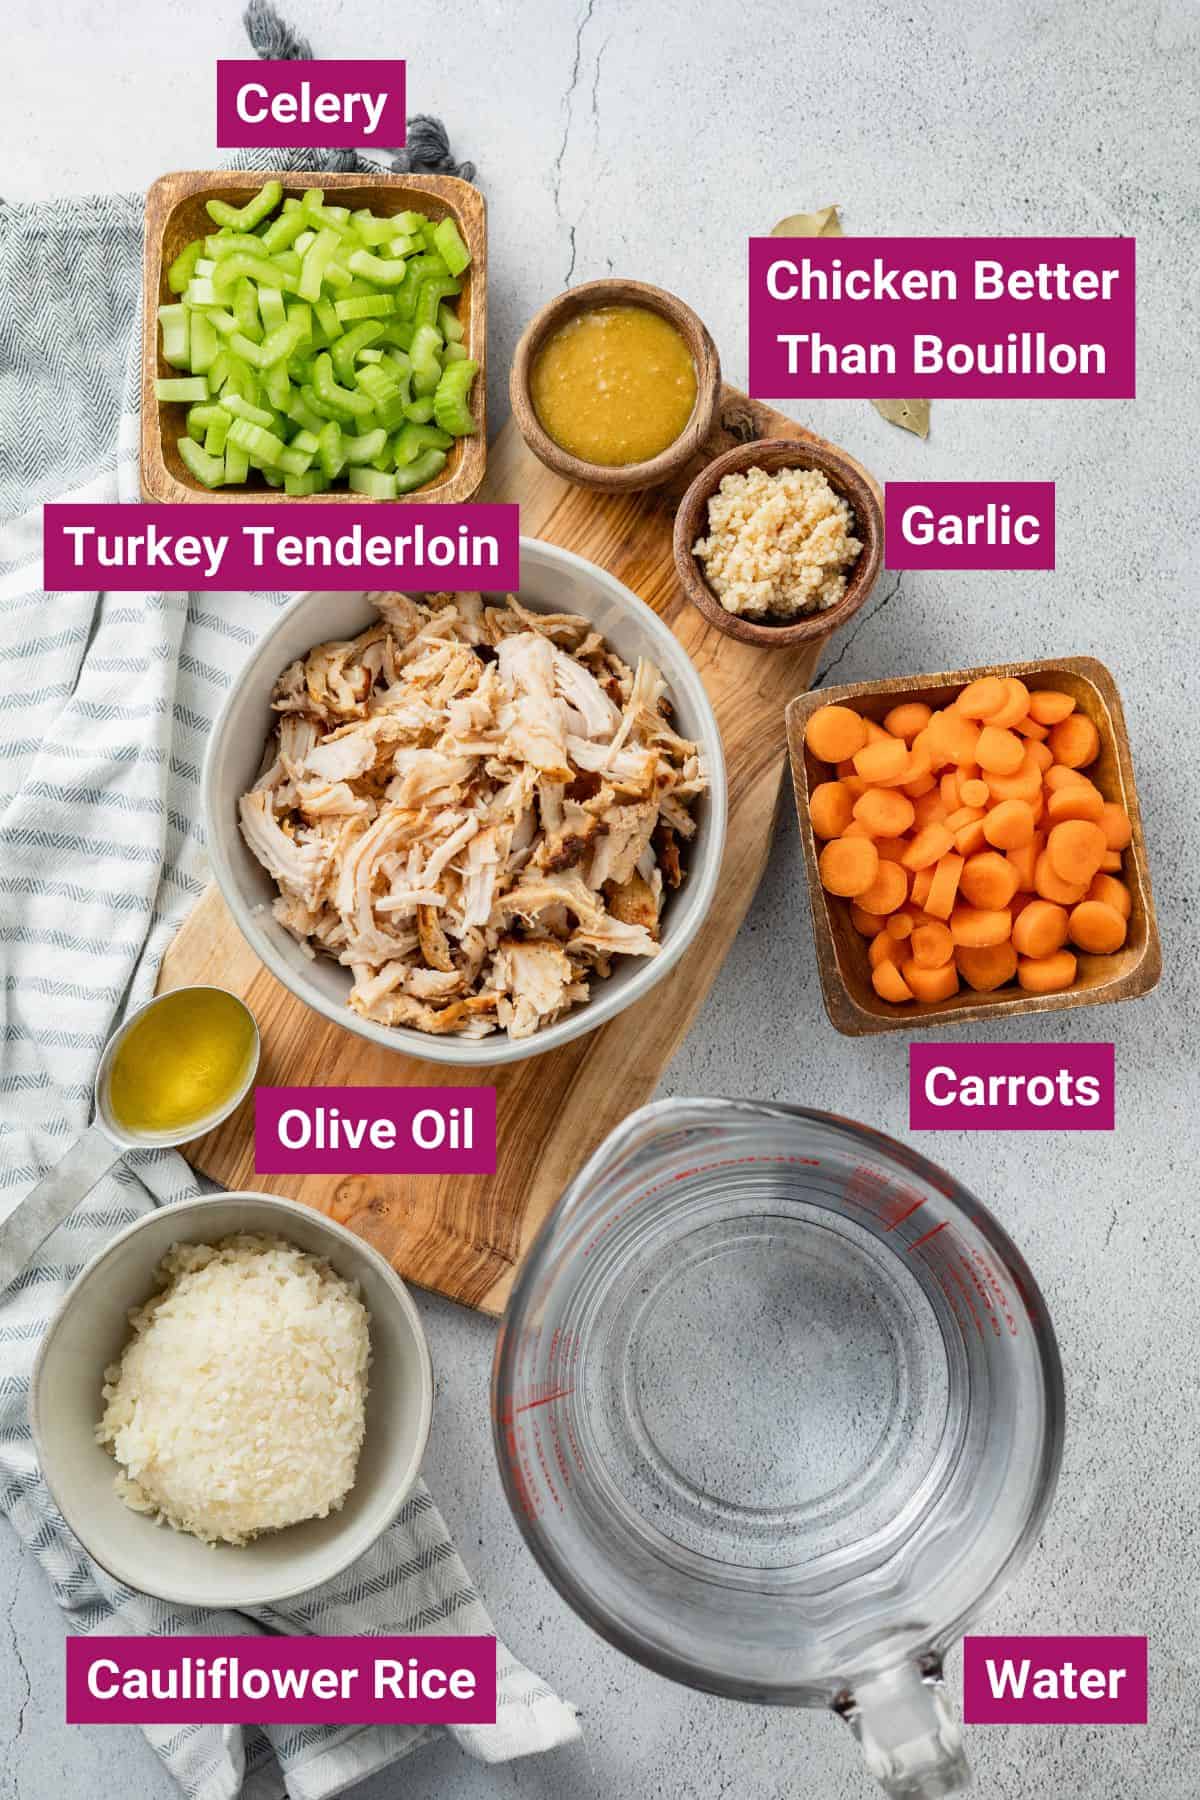 ingredients needed to make leftover turkey soup: celery, turkey tenderloin, chicken better than bouillon, garlic, carrots, olive oil, cauliflower rice and water on separate bowls and containers